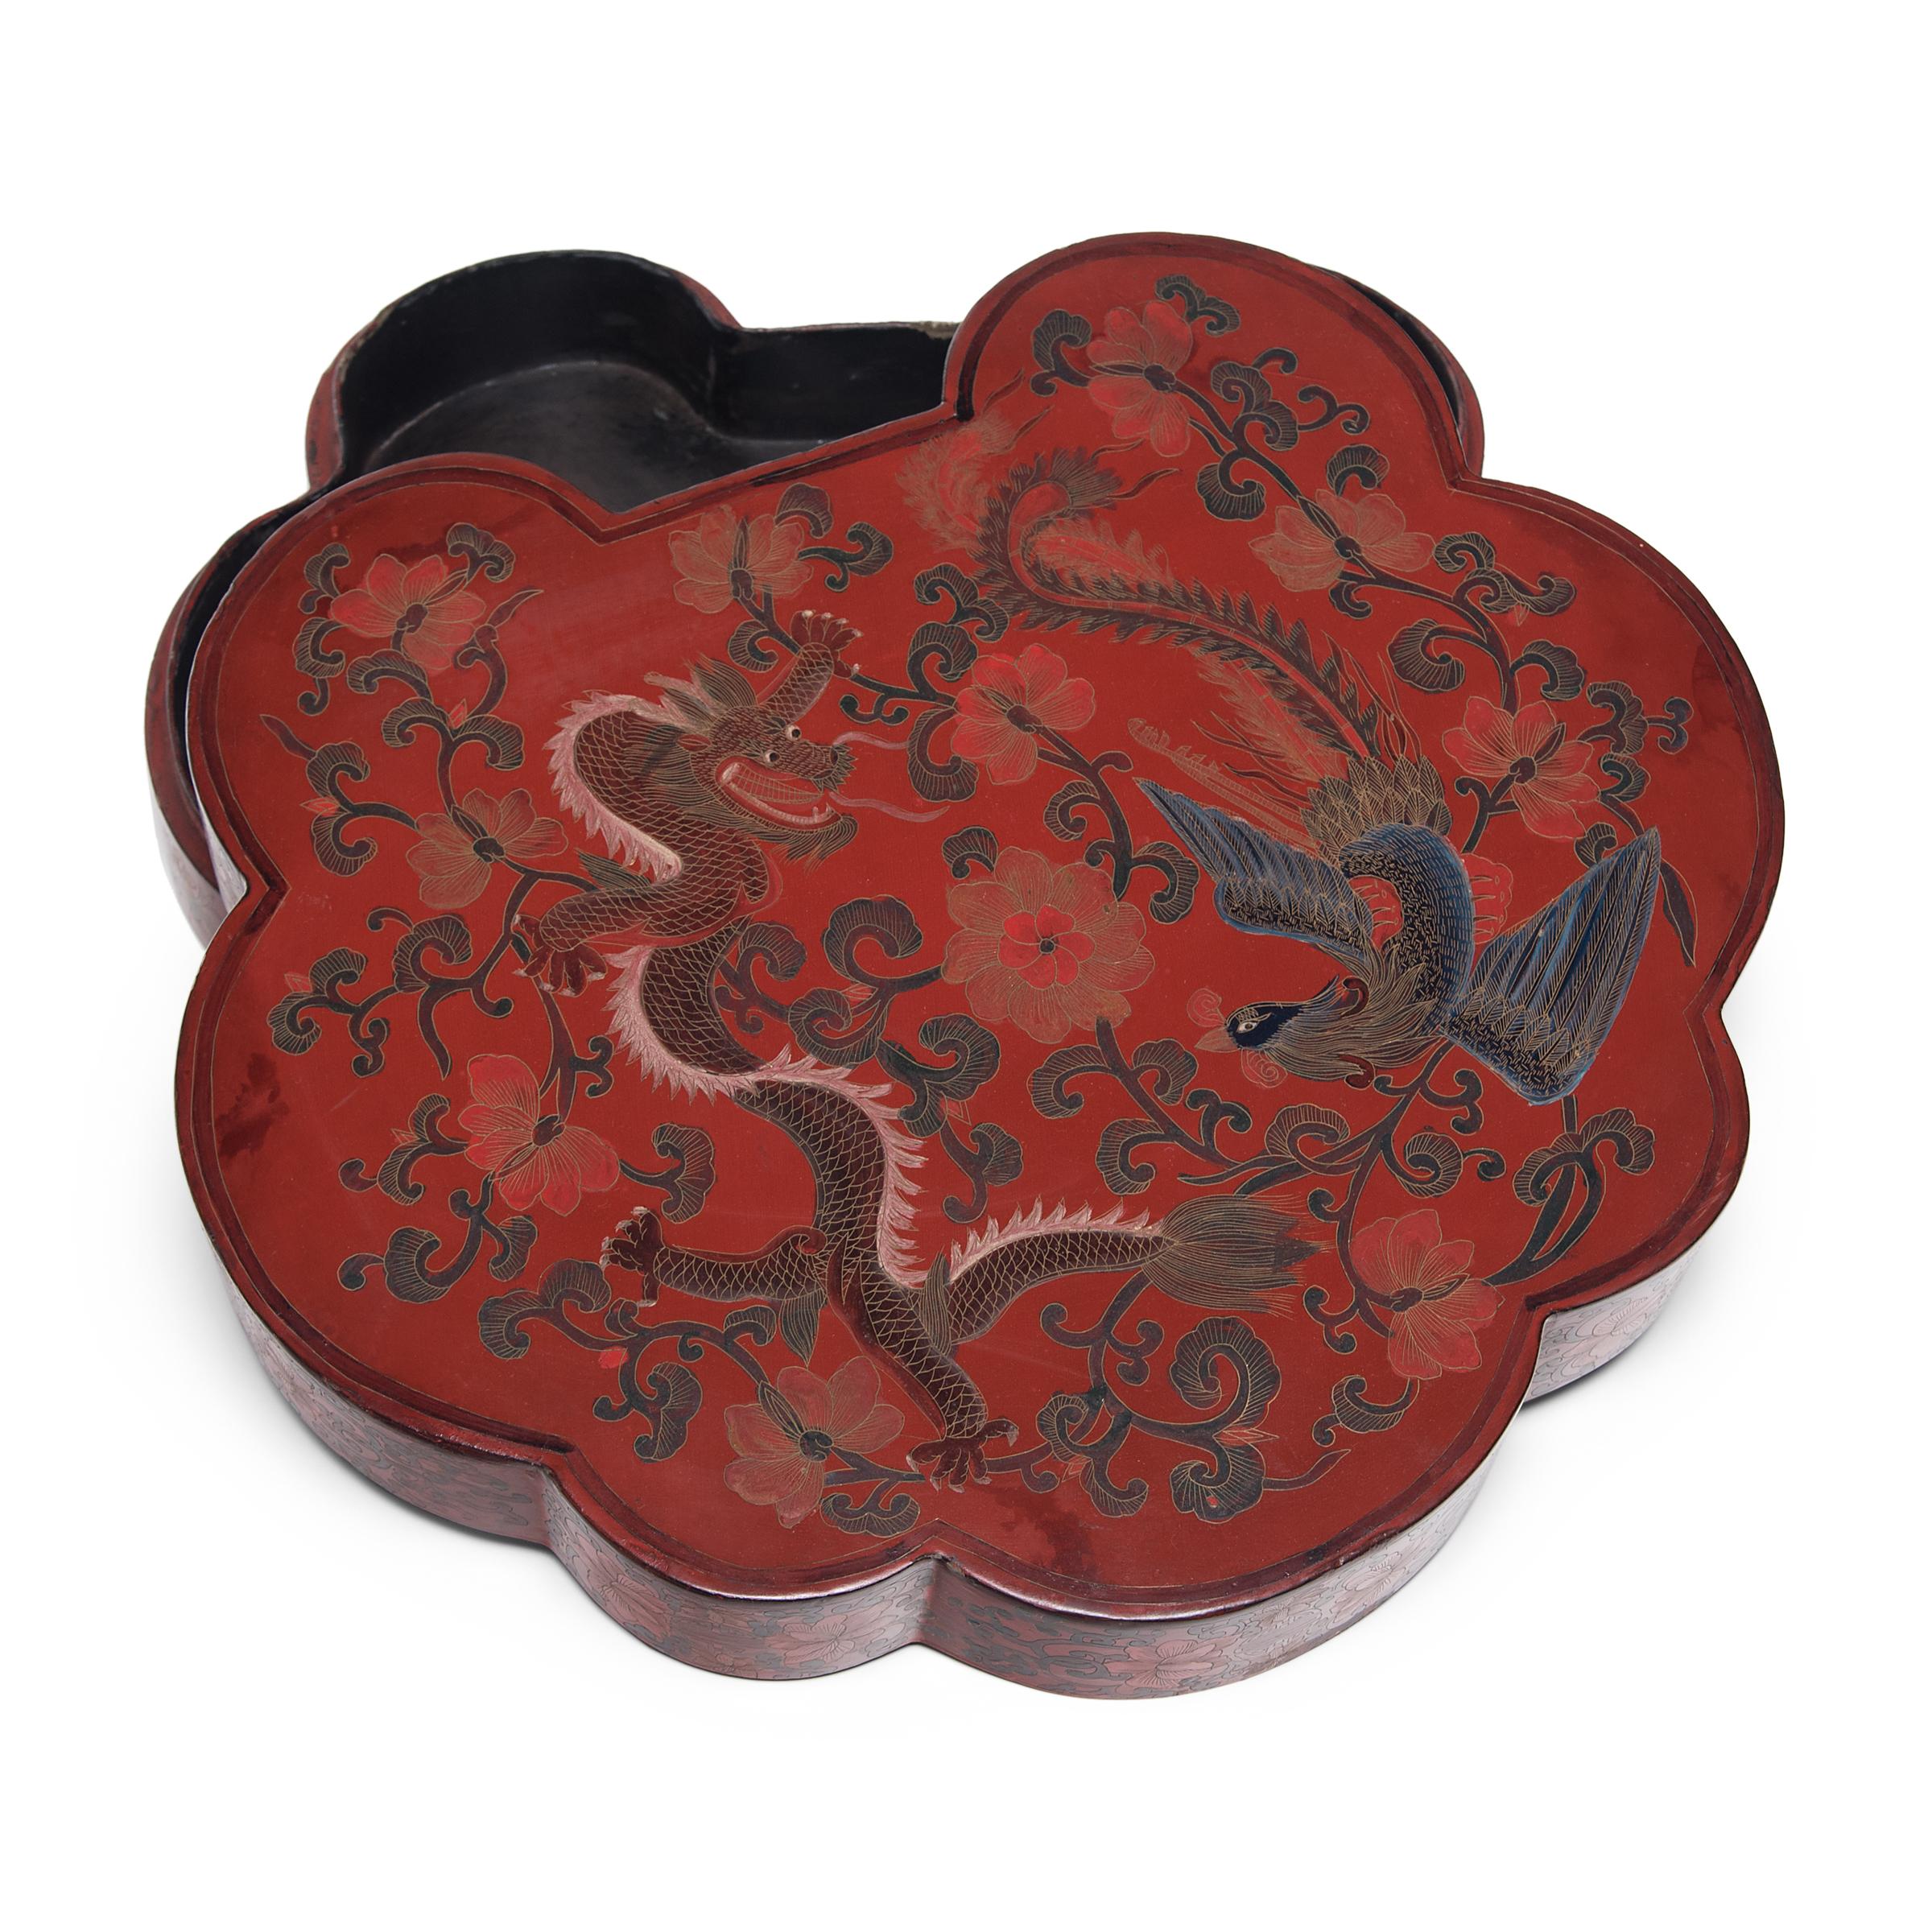 This finely lacquered box was once presented as a gift, filled with popular snacks like roasted melon seeds, dried fruit, and cinnamon-toasted soy beans. The lightweight box is formed in the shape of a ruyi scepter, a symbol of prosperity and a